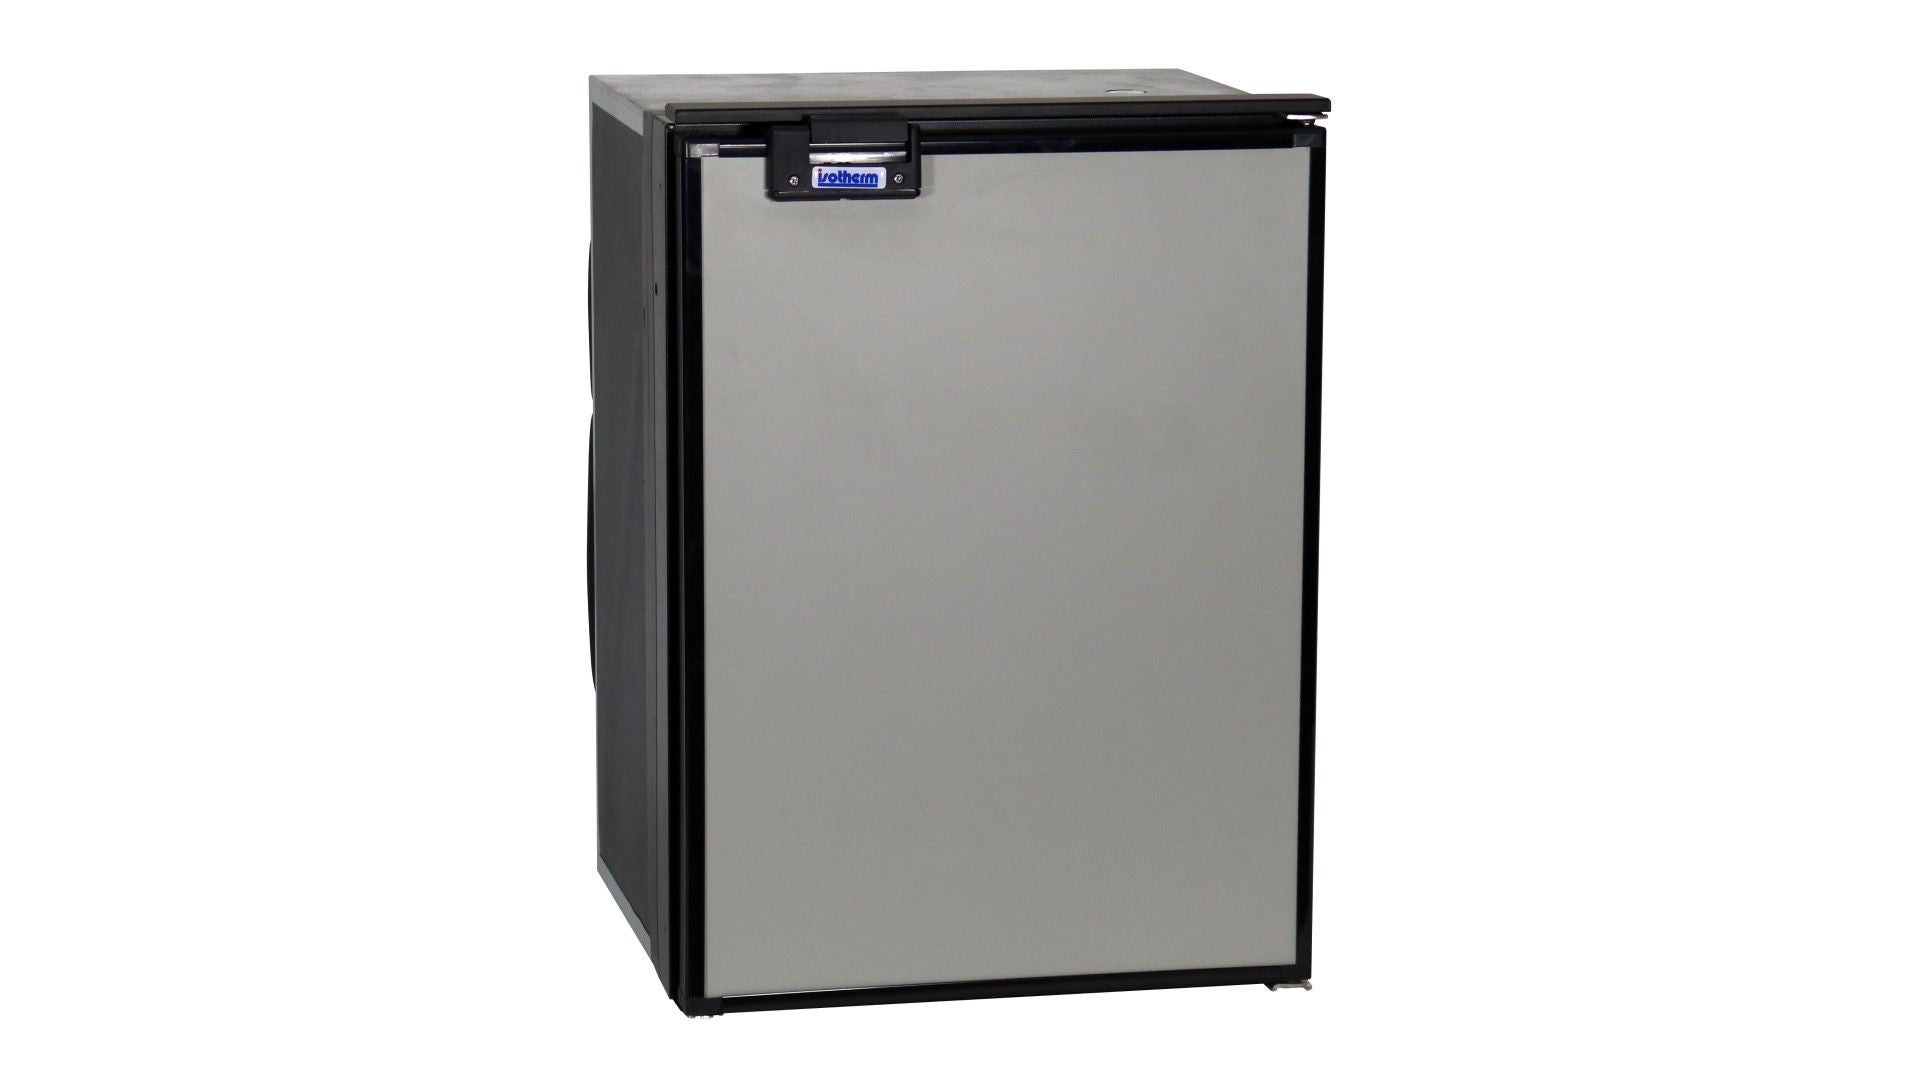 Product picture of Cruise 42 fridge with closed door